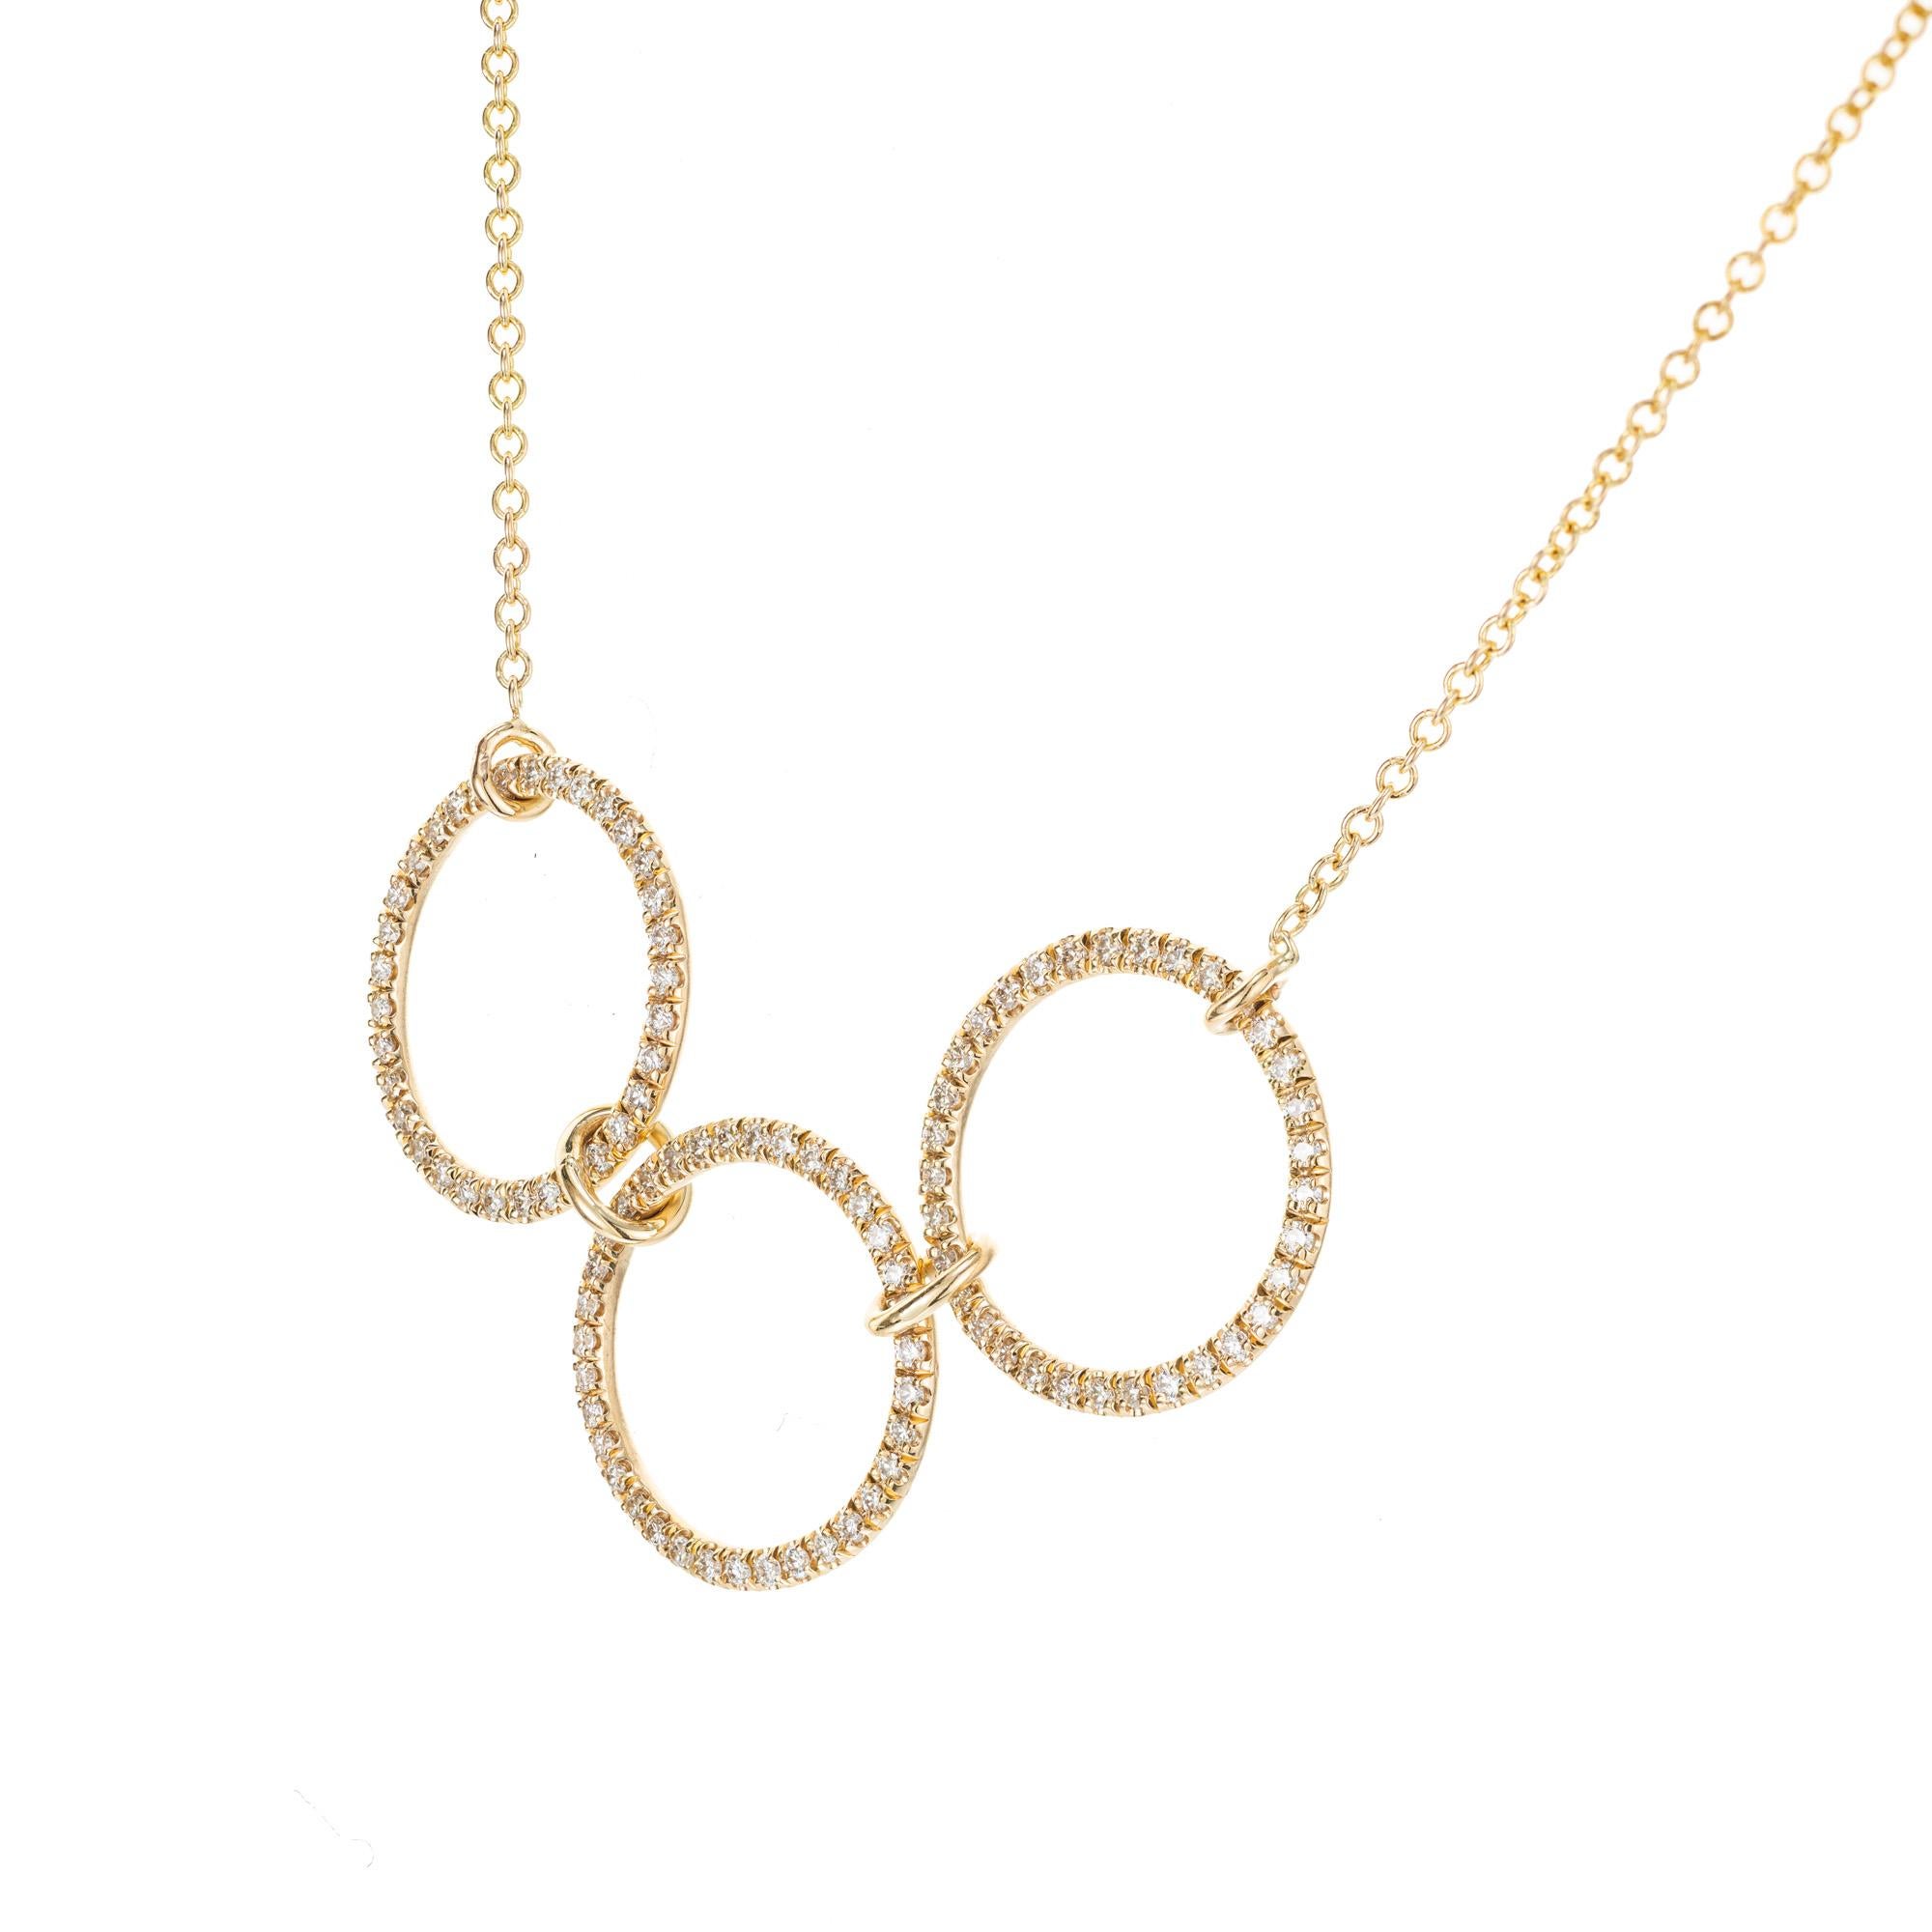 Round Cut Peter Suchy .28 Carat Diamond Yellow Gold Pendant Necklace For Sale